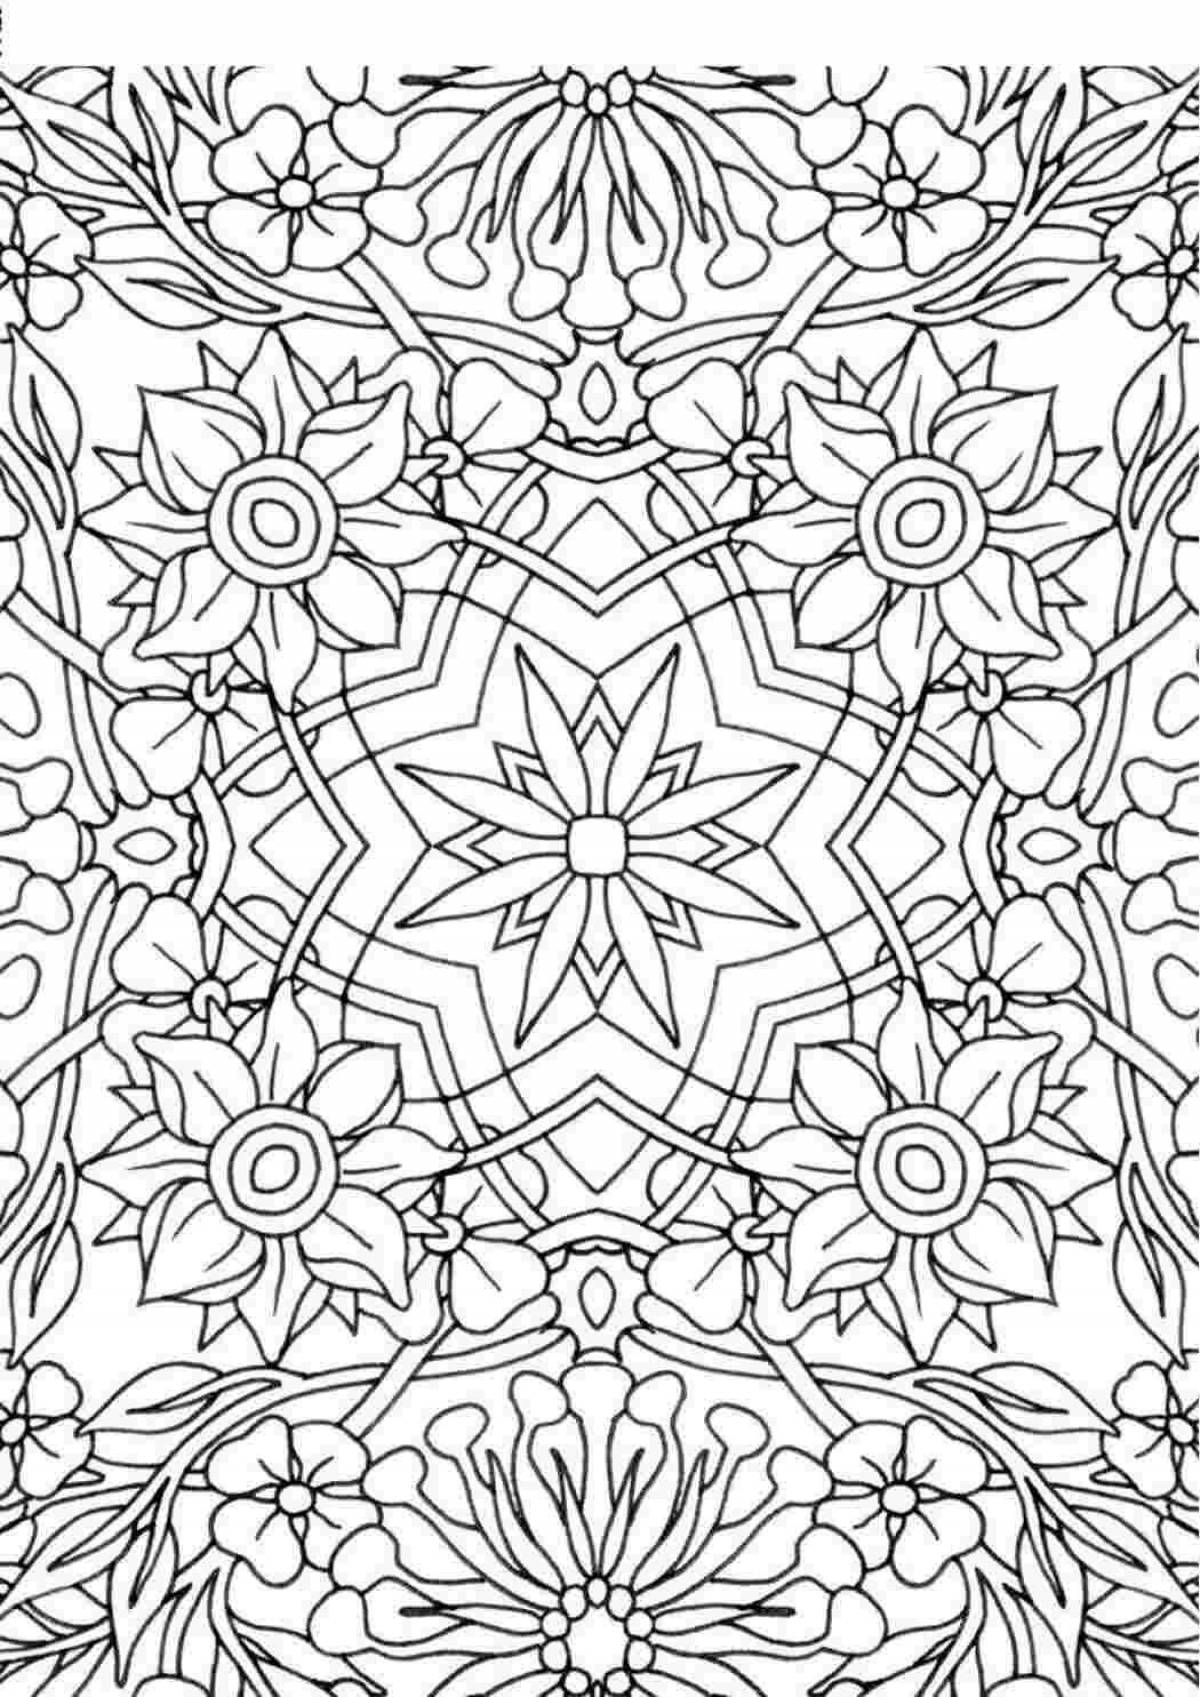 Serene coloring page